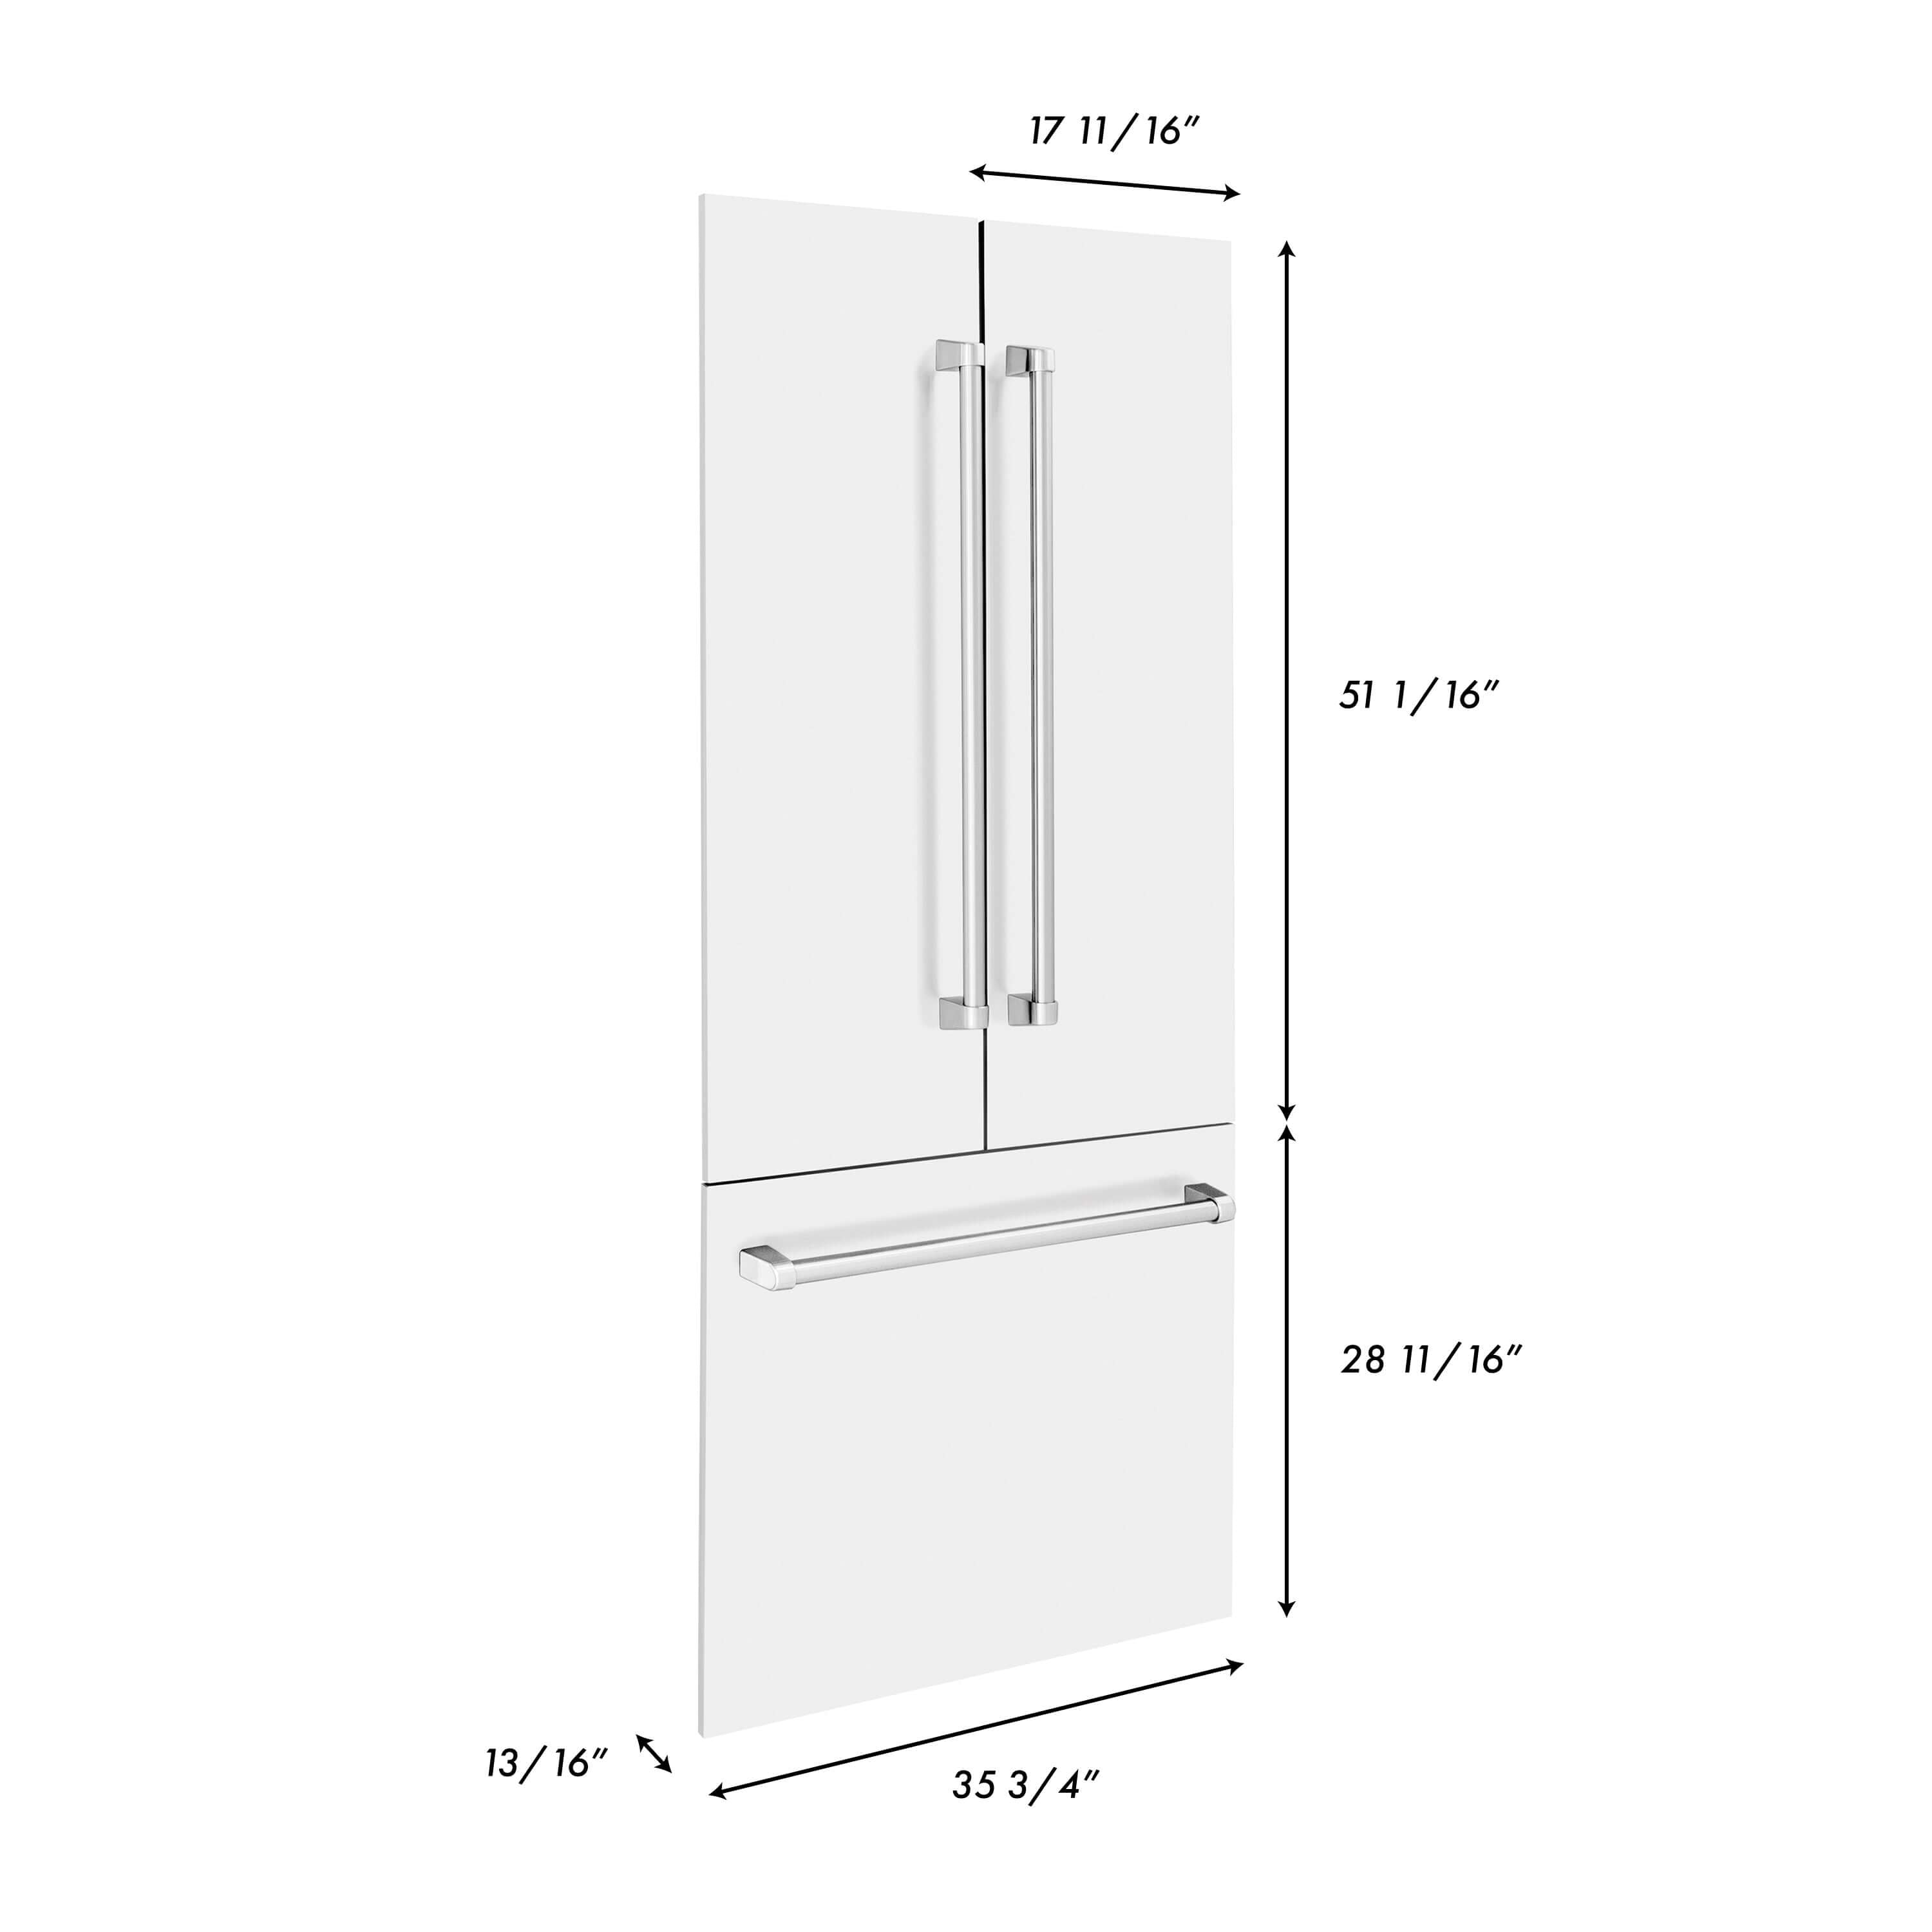 Panels & Handles Only- ZLINE 36 in. Refrigerator Panels in White Matte for a 36 in. Built-in Refrigerator (RPBIV-WM-36)